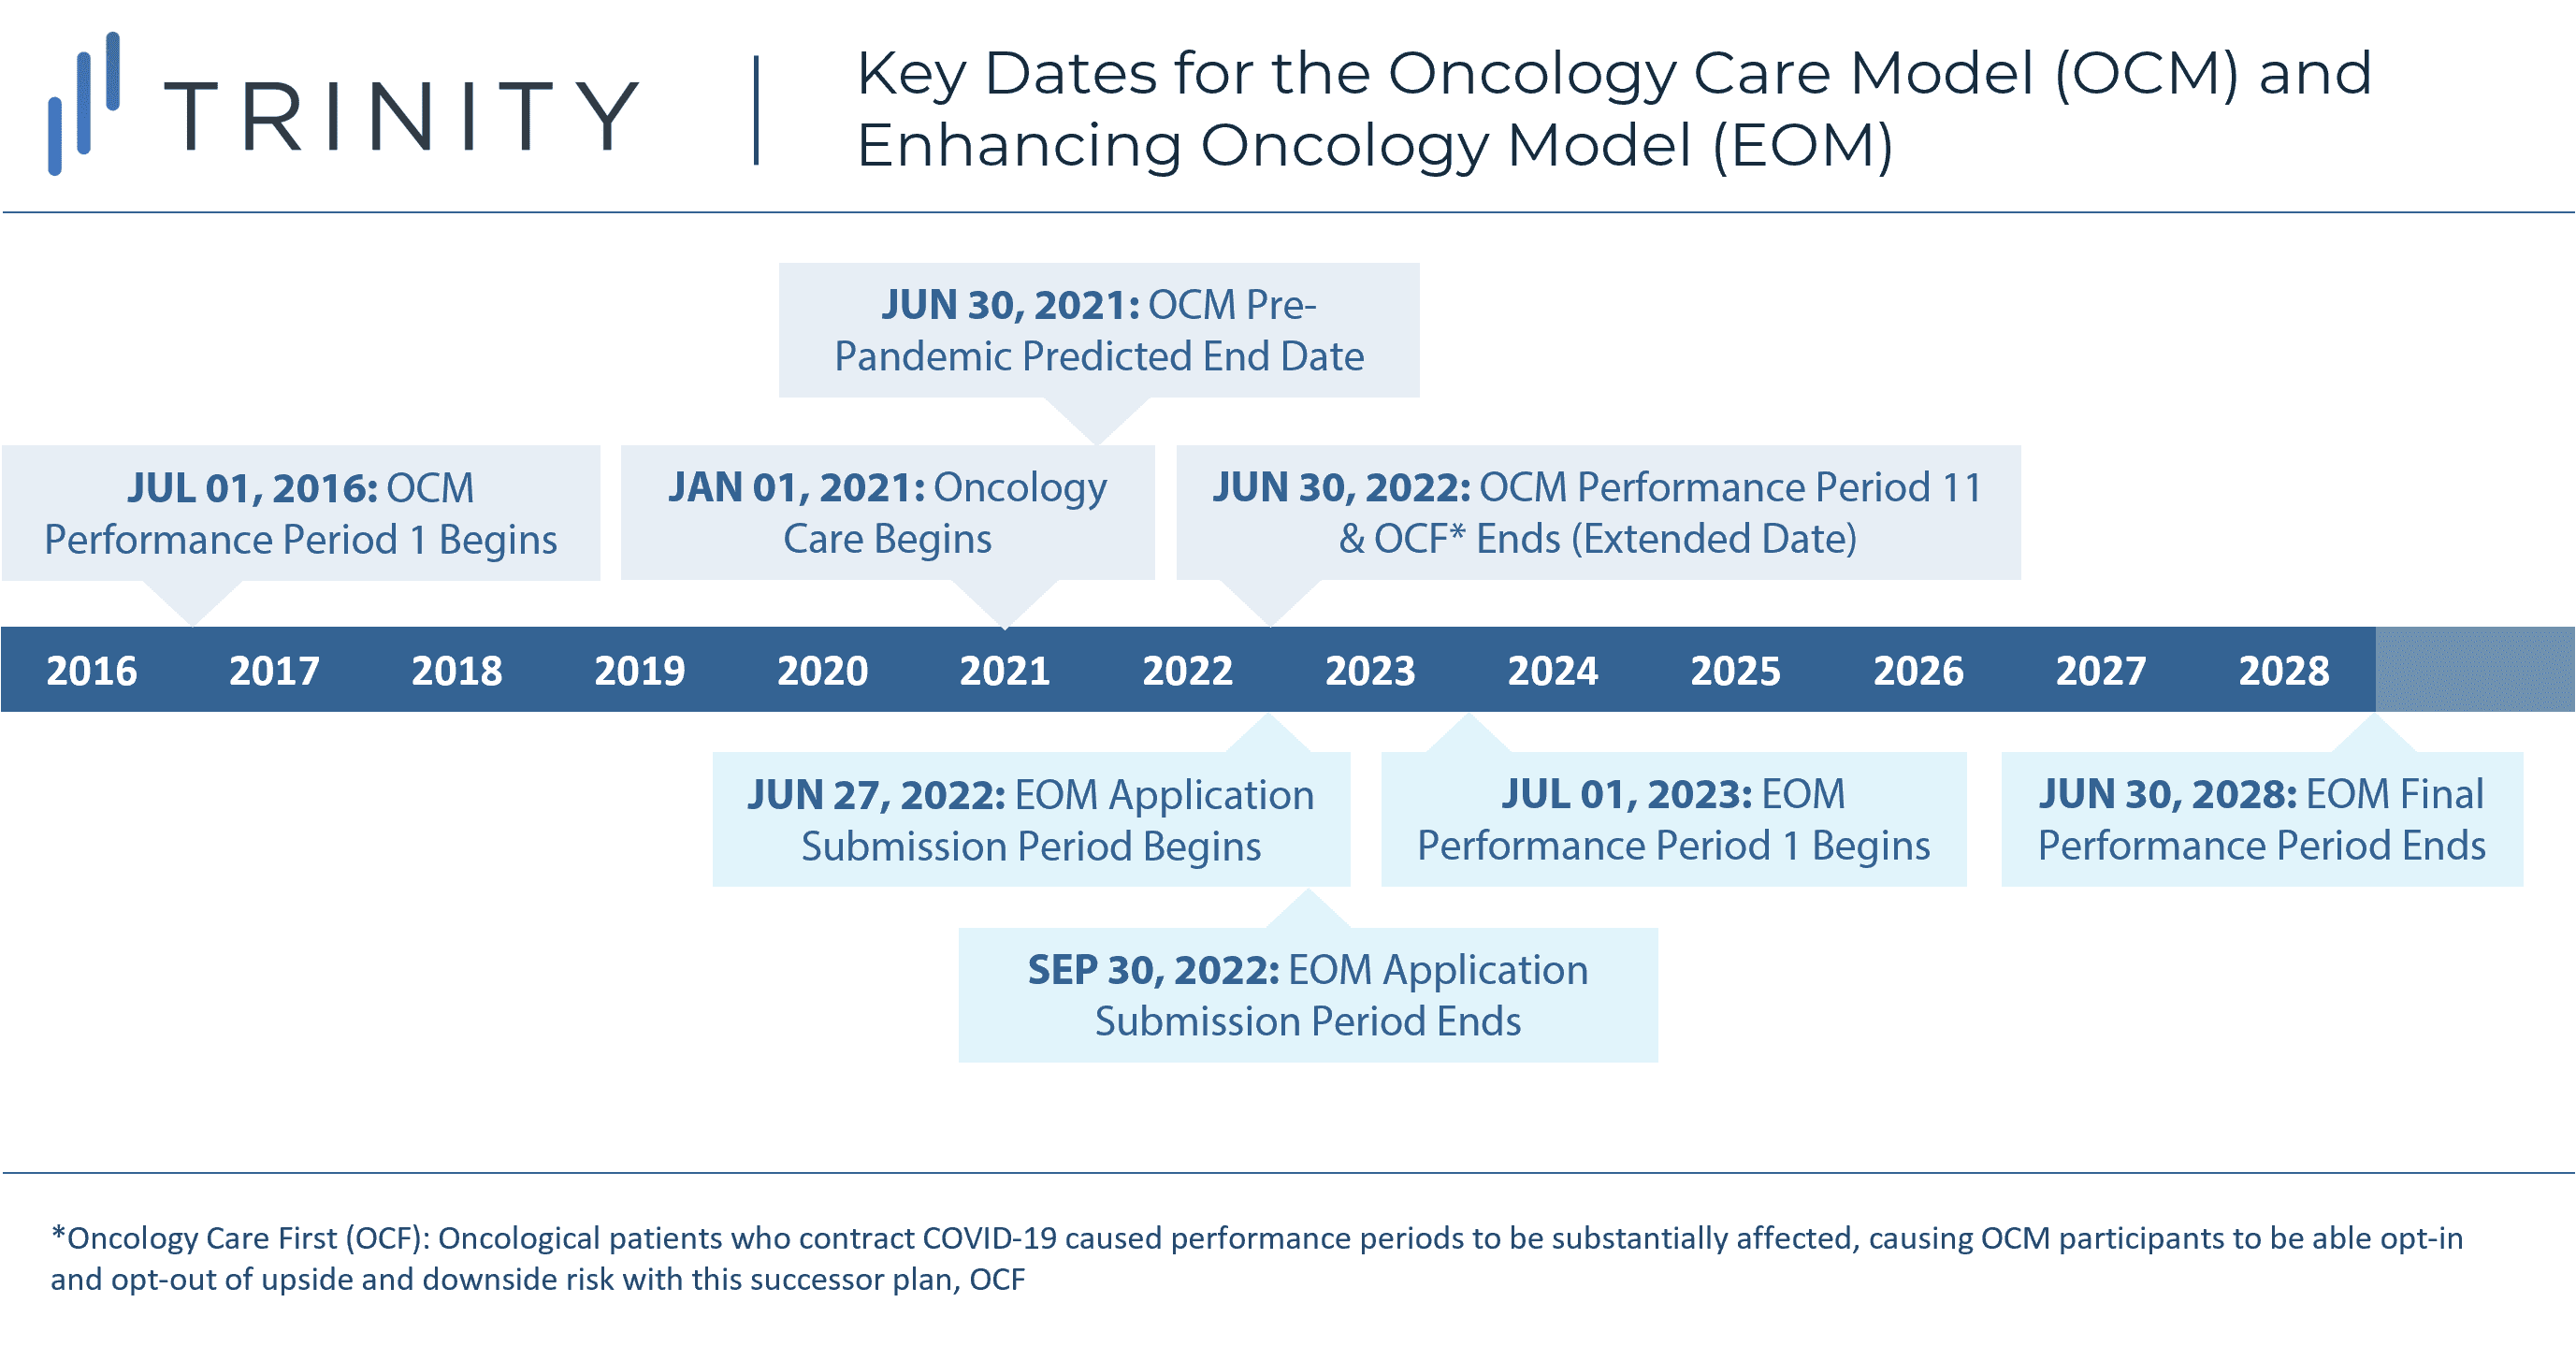 Timeline of the OCM and EOM key dates; the EOM has a projected start date of July 01 2023